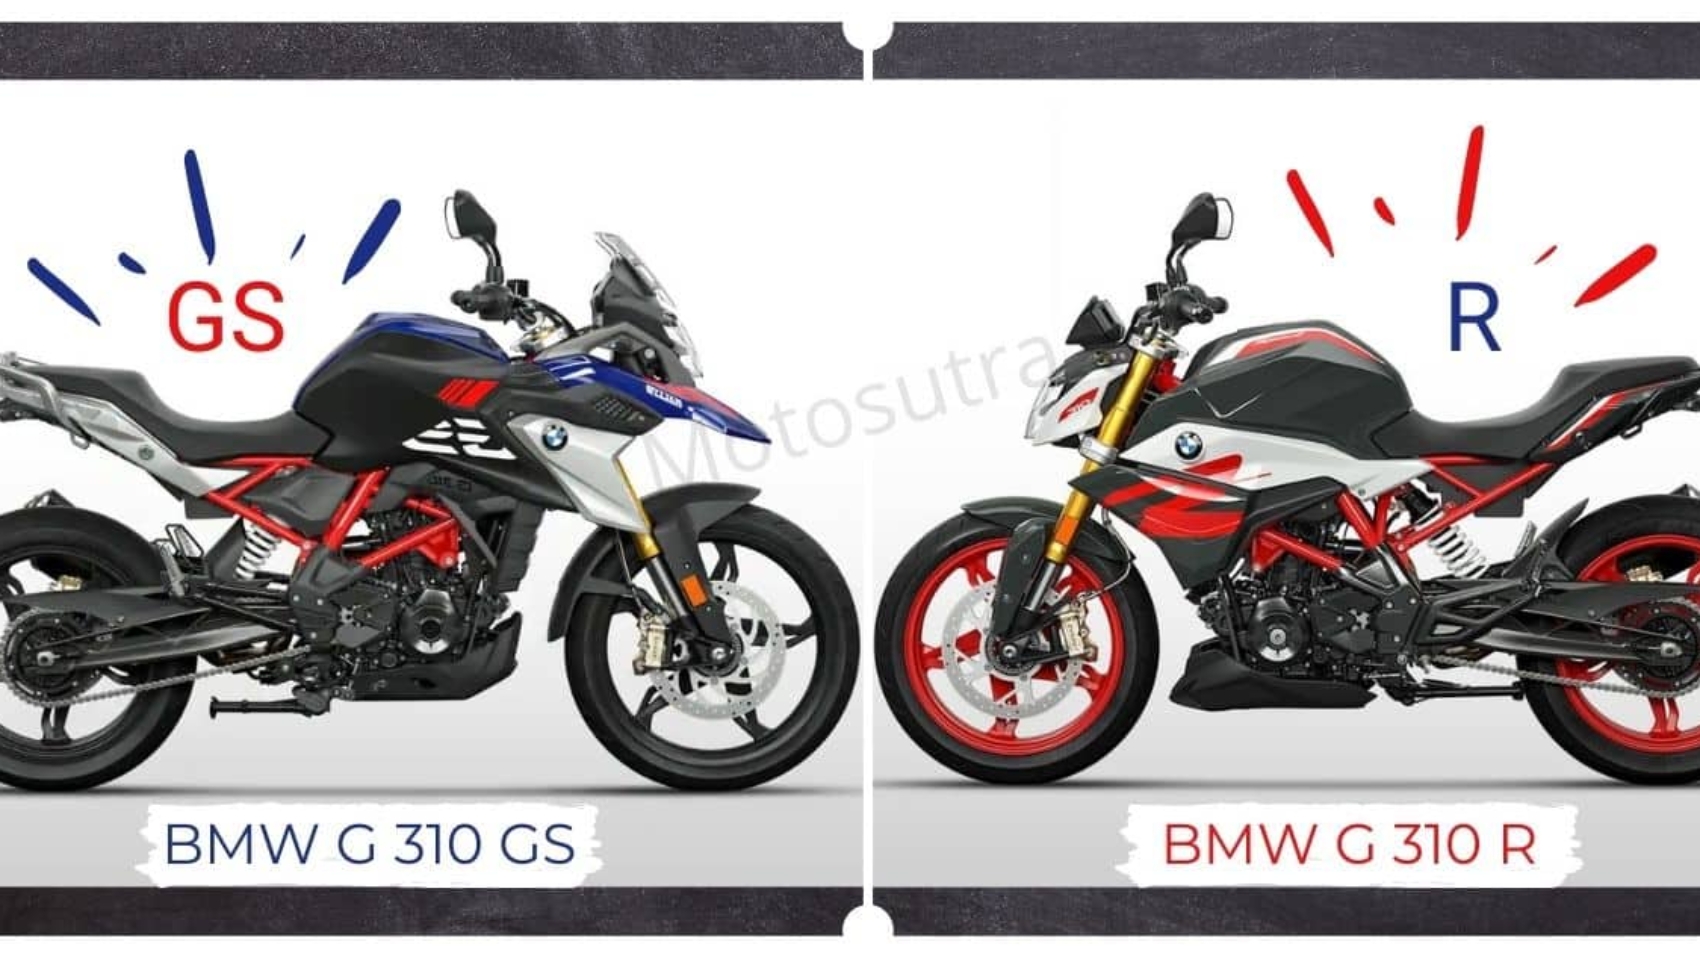 BMW G 310 R And G 310 GS 2020 Update